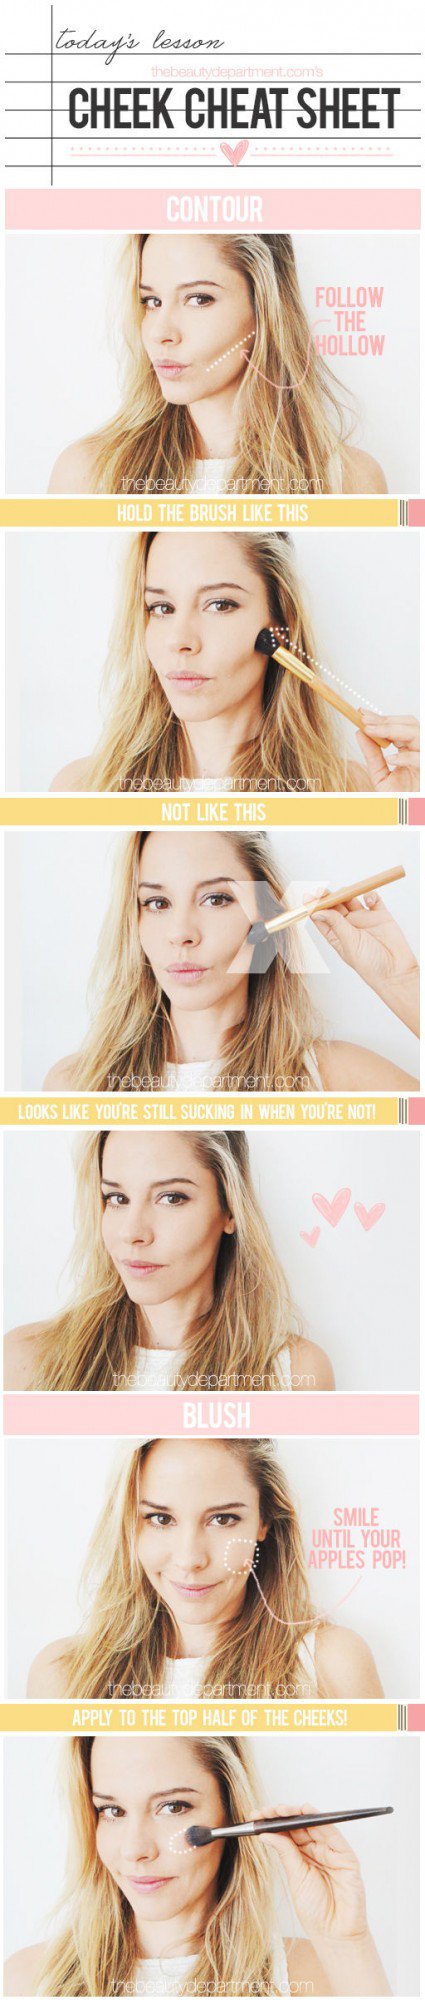 16 Makeup Tricks For Flawless Look Every Woman Should Know (3)